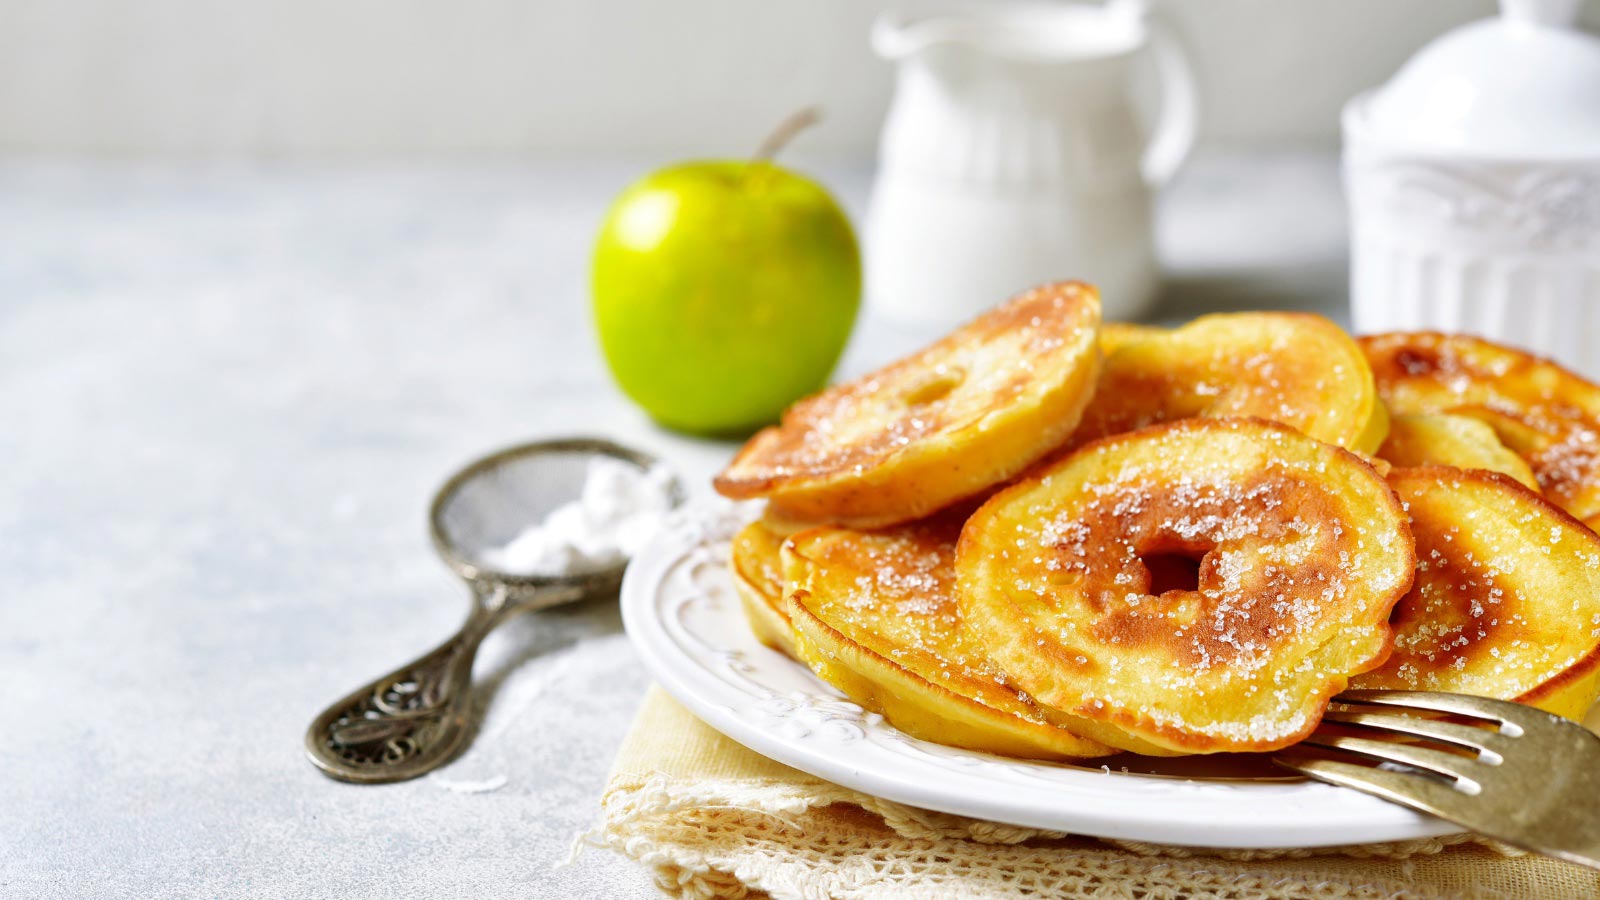 Apple pancakes for a breakfast on white plate over light slate, stone or concrete background.